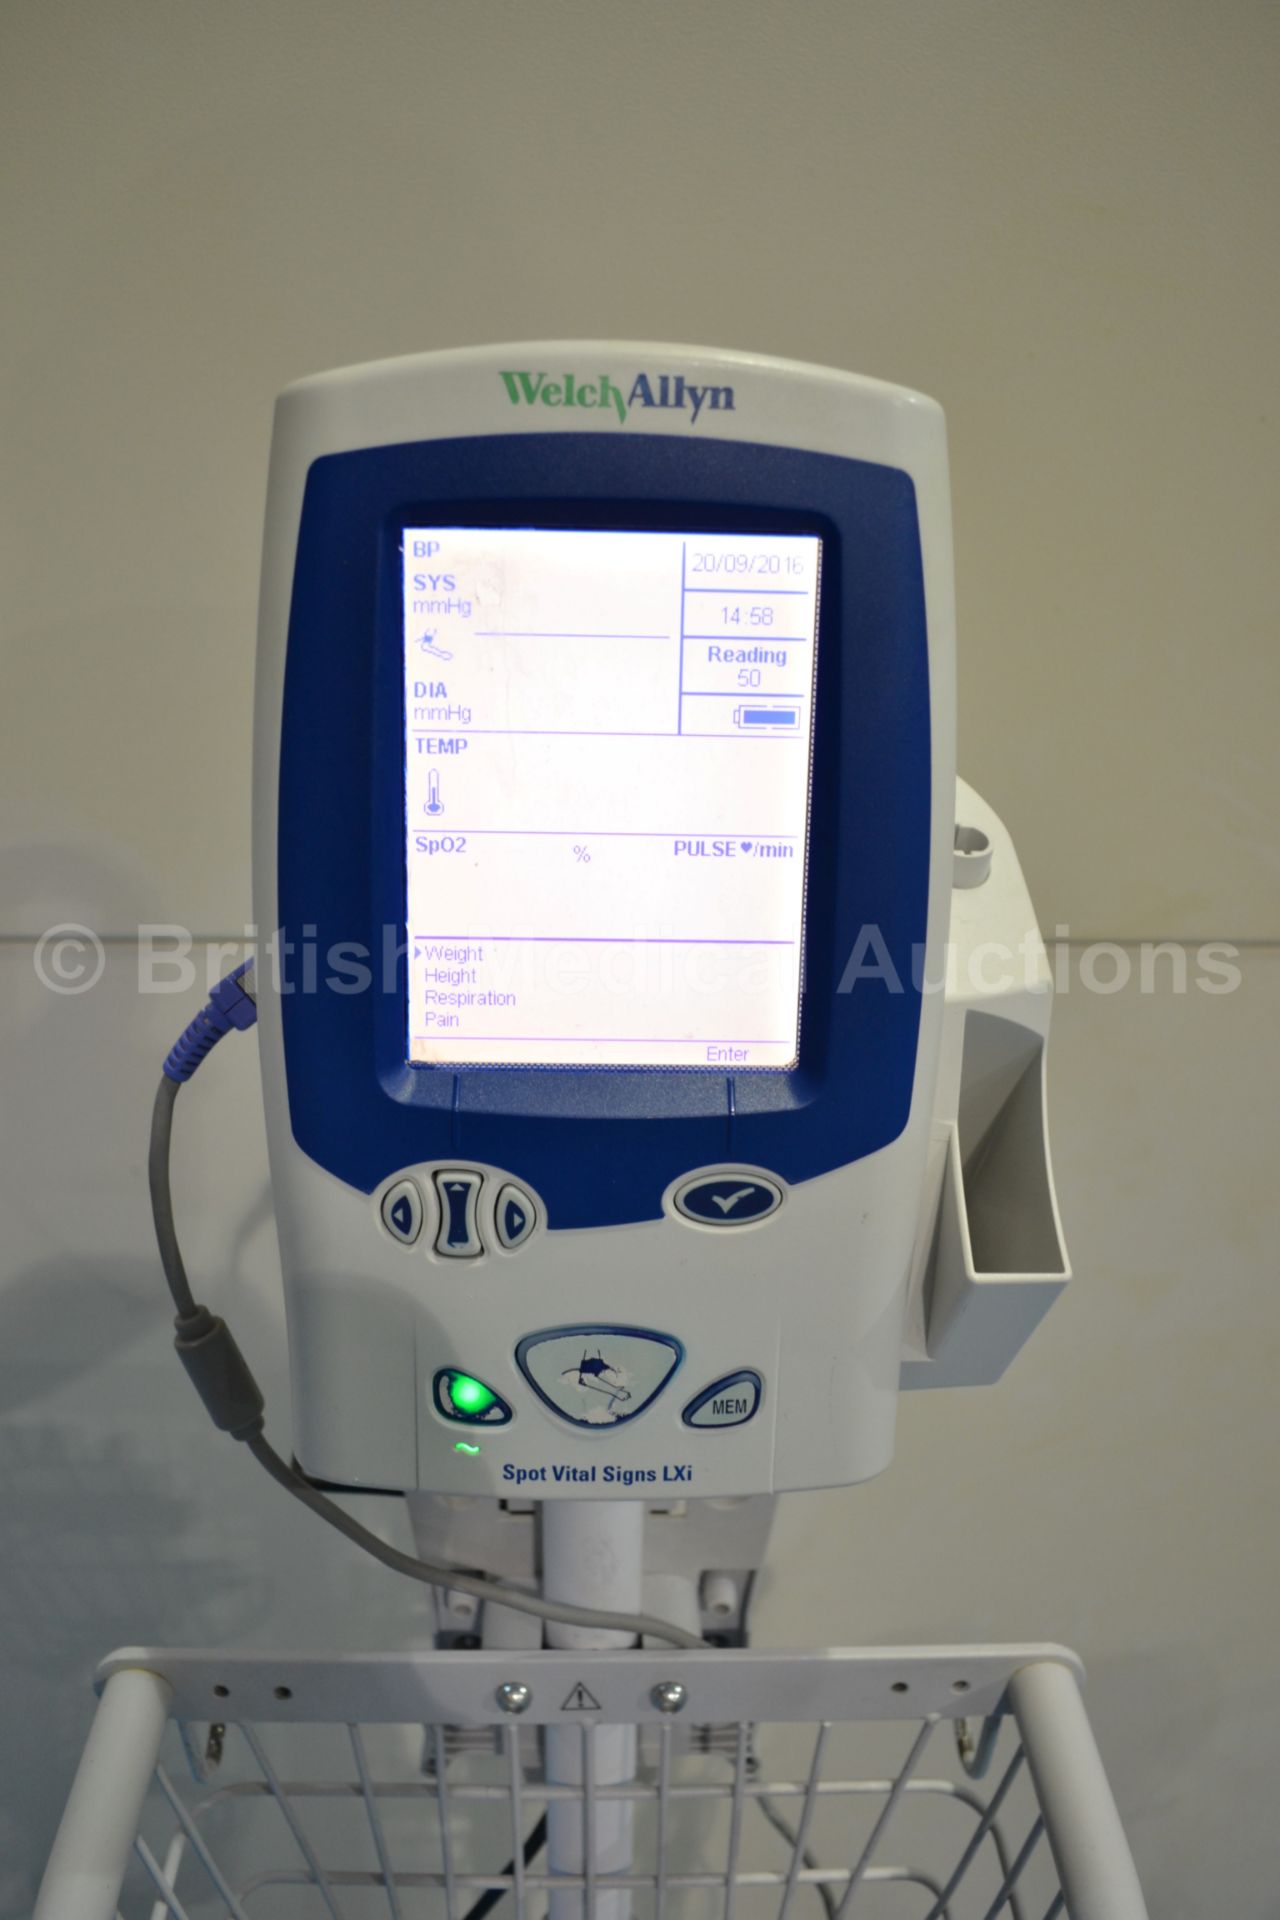 Welch Allyn Spot Vital Signs Monitor LXi on Stand